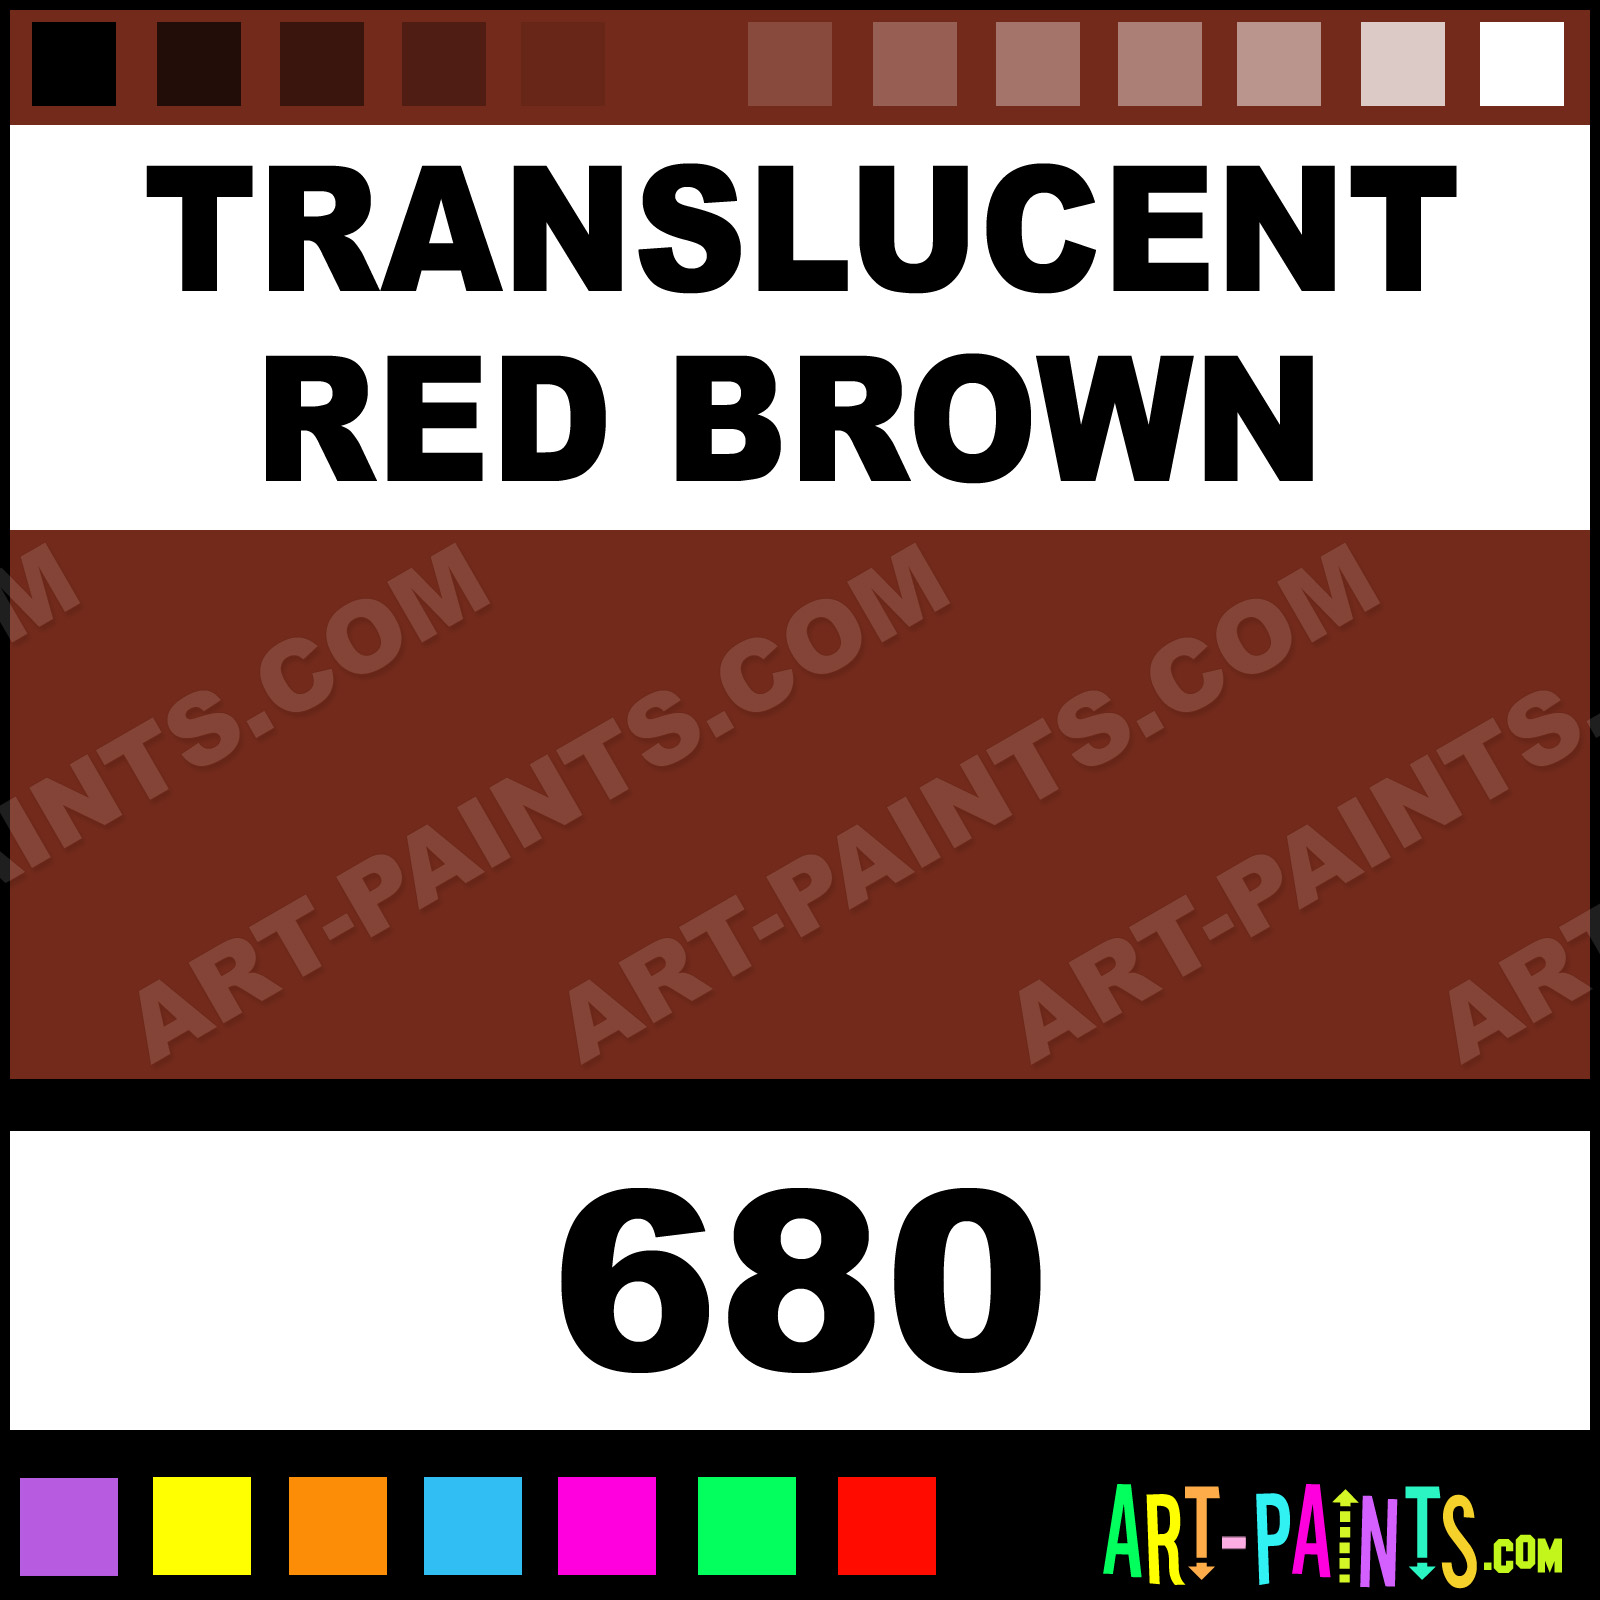 Translucent-Red-Brown-xlg.jpg